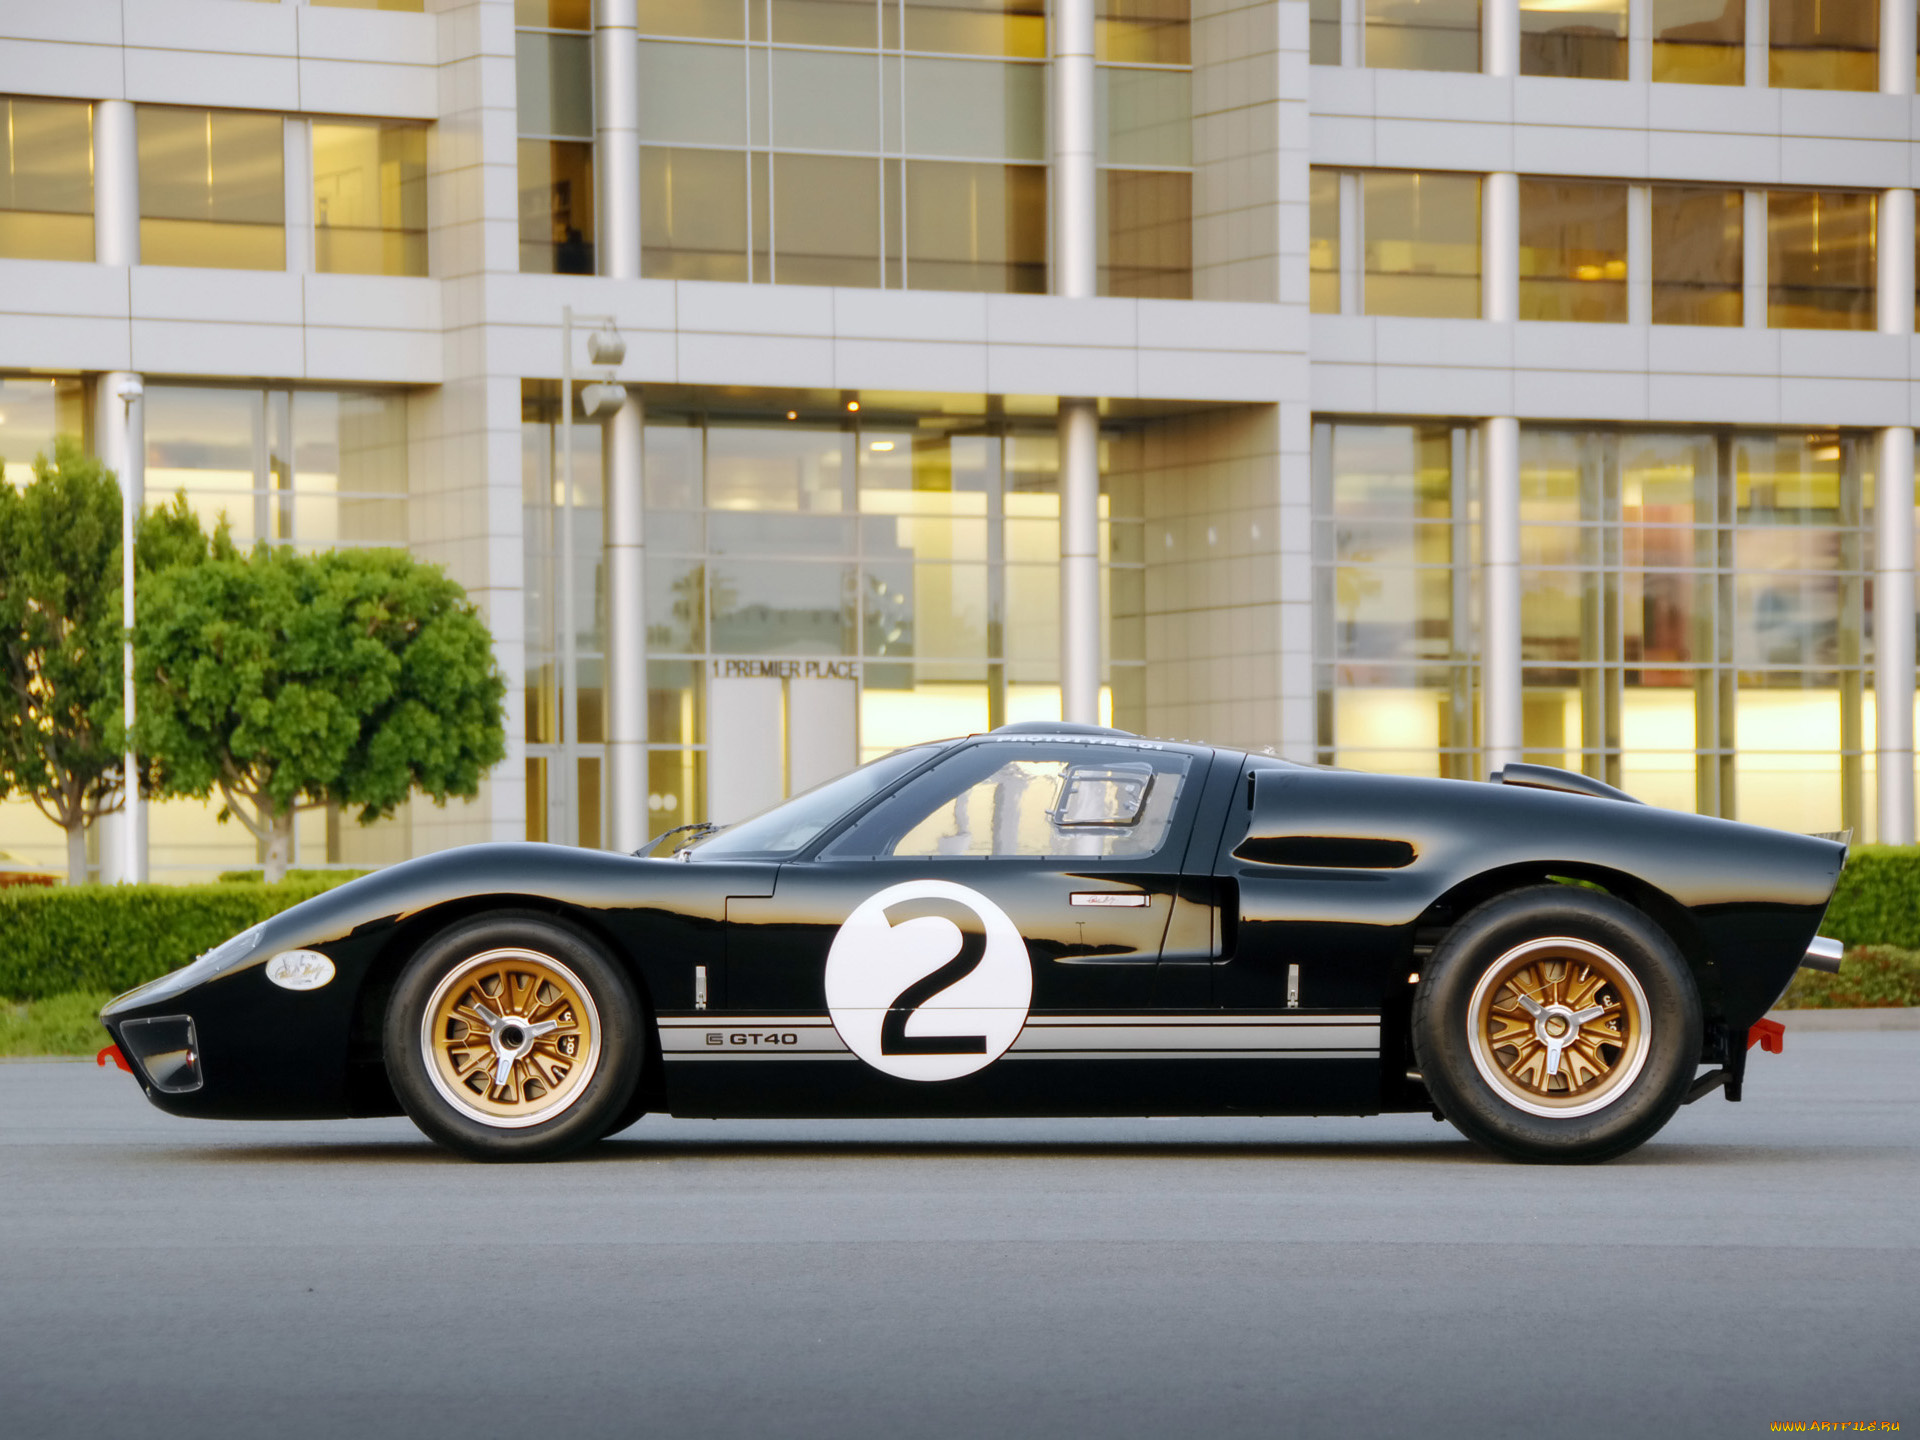 2008, shelby, 85th, commemorative, gt40, автомобили, ford